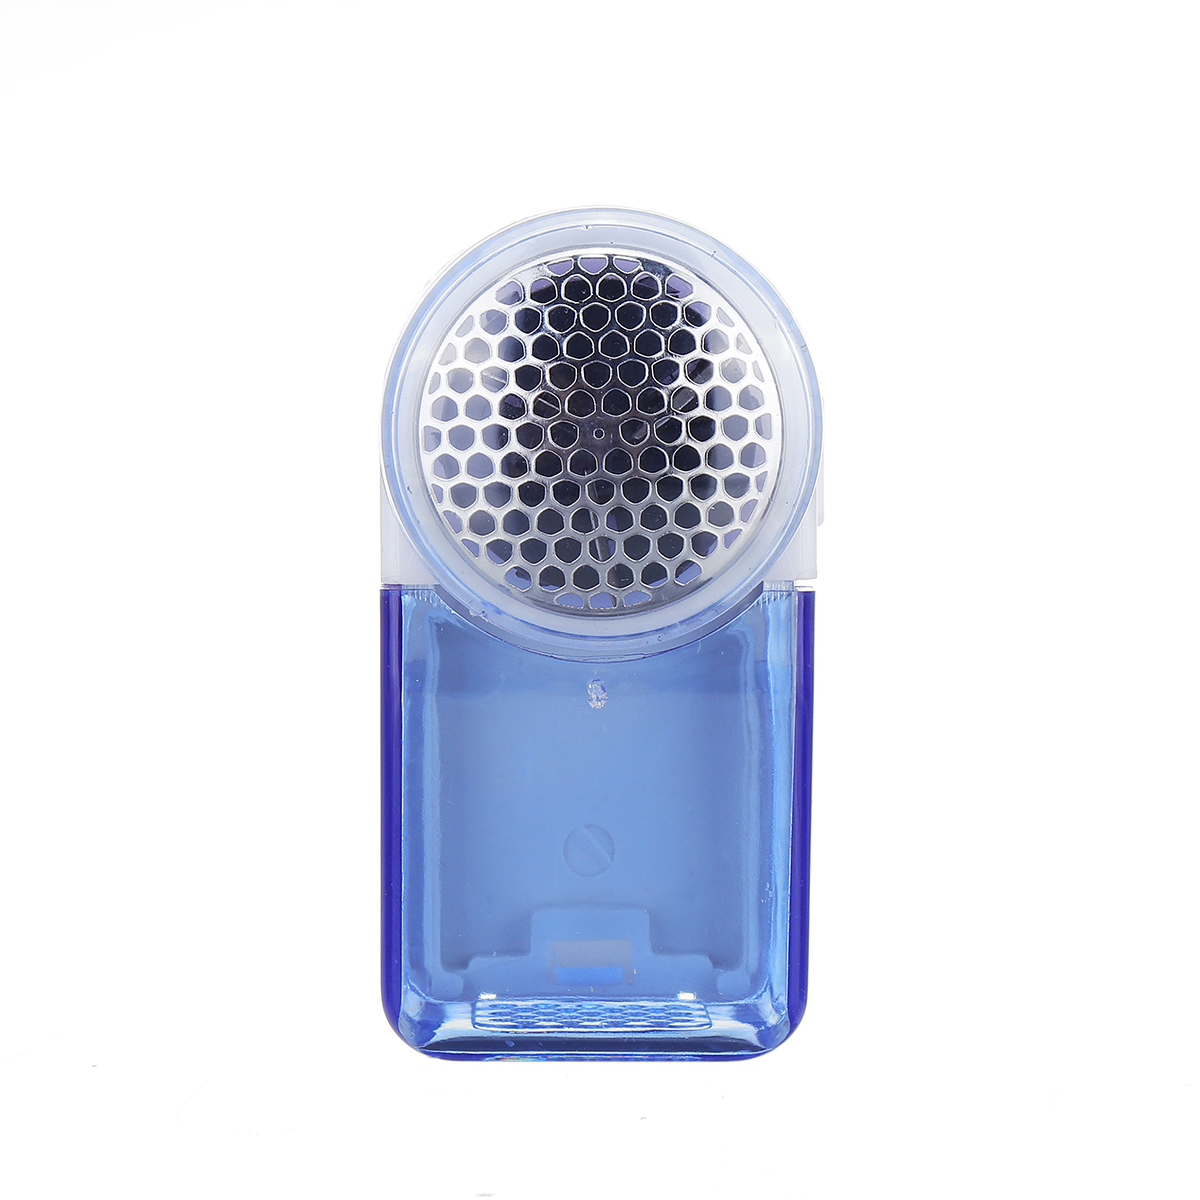 Portable Electric Sweater Lint Remover Fabric Shaver Clothes Lint Fuzz Pill Fluff Remover for Knitwear Carpet Blankets